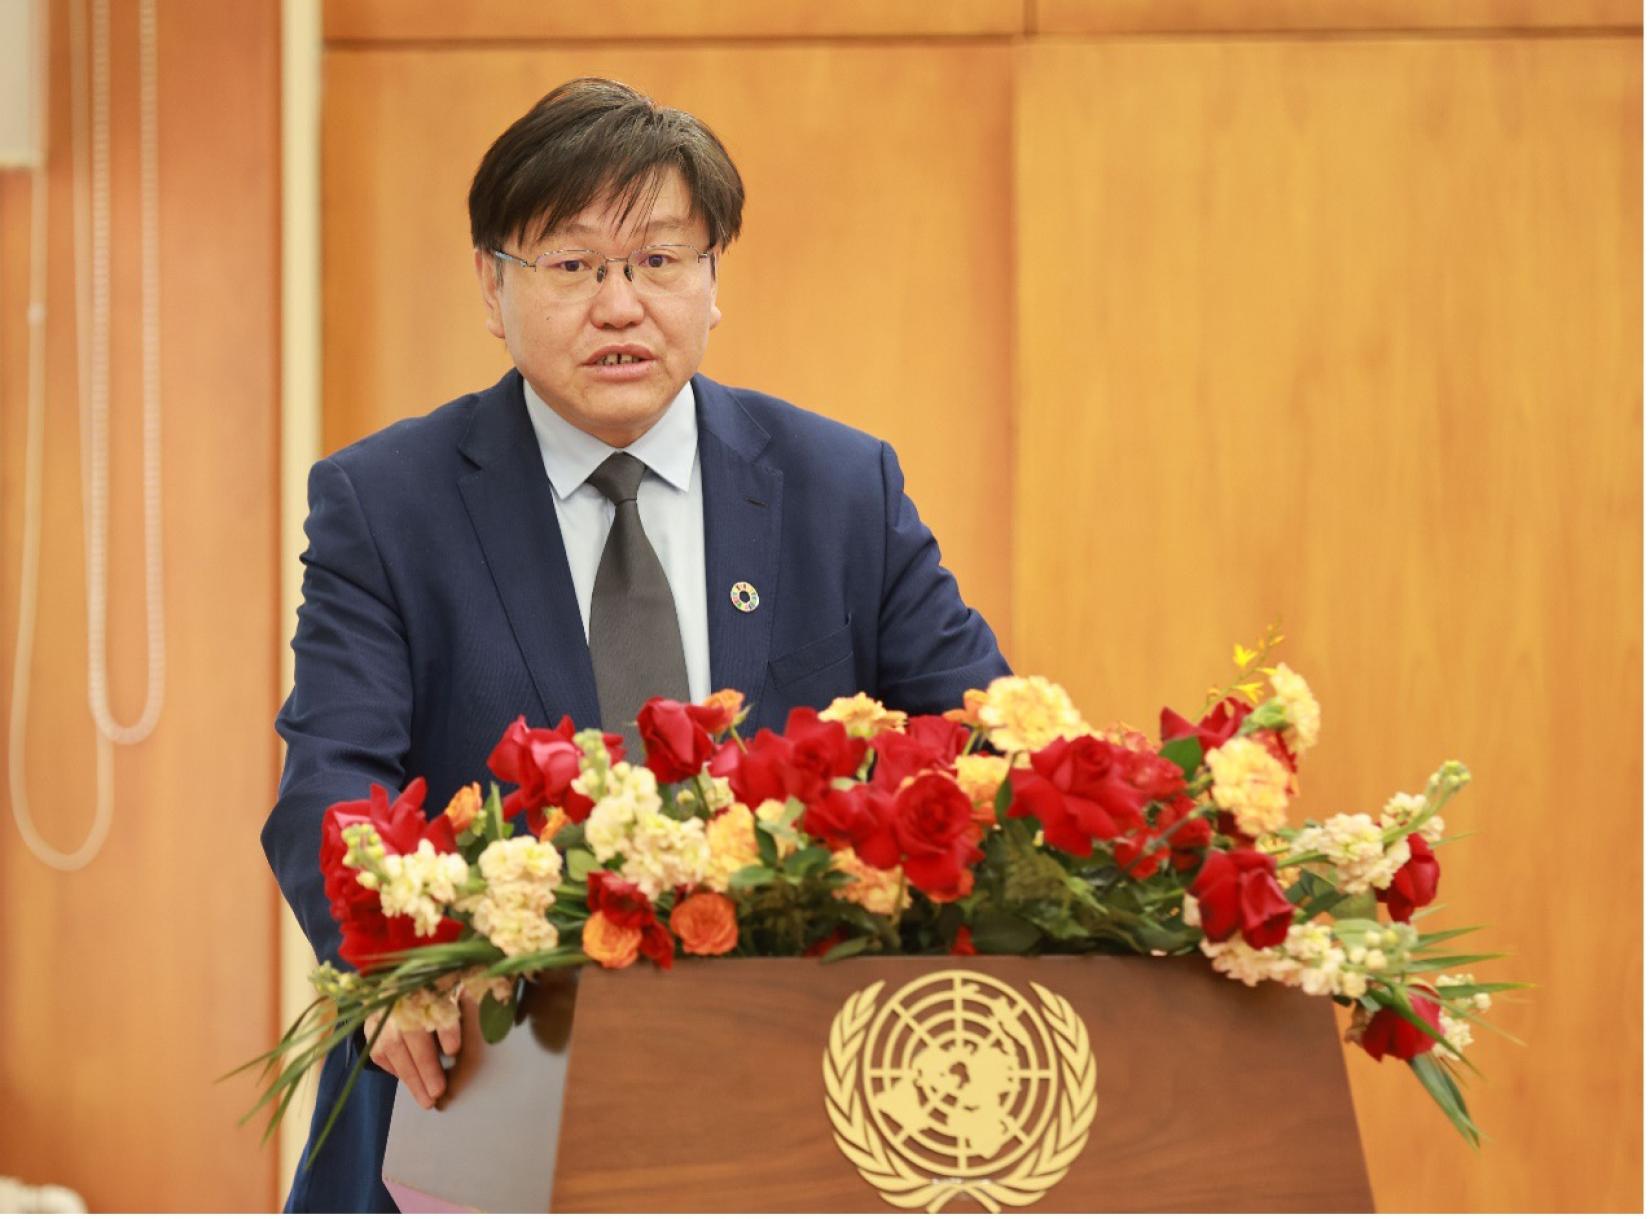 Wang Xiaolin, Deputy Dean of Institute for Six-Sector Economy, Fudan University, delivers a speech at the seminar. [Photo by Dong Ning/China.org.cn]